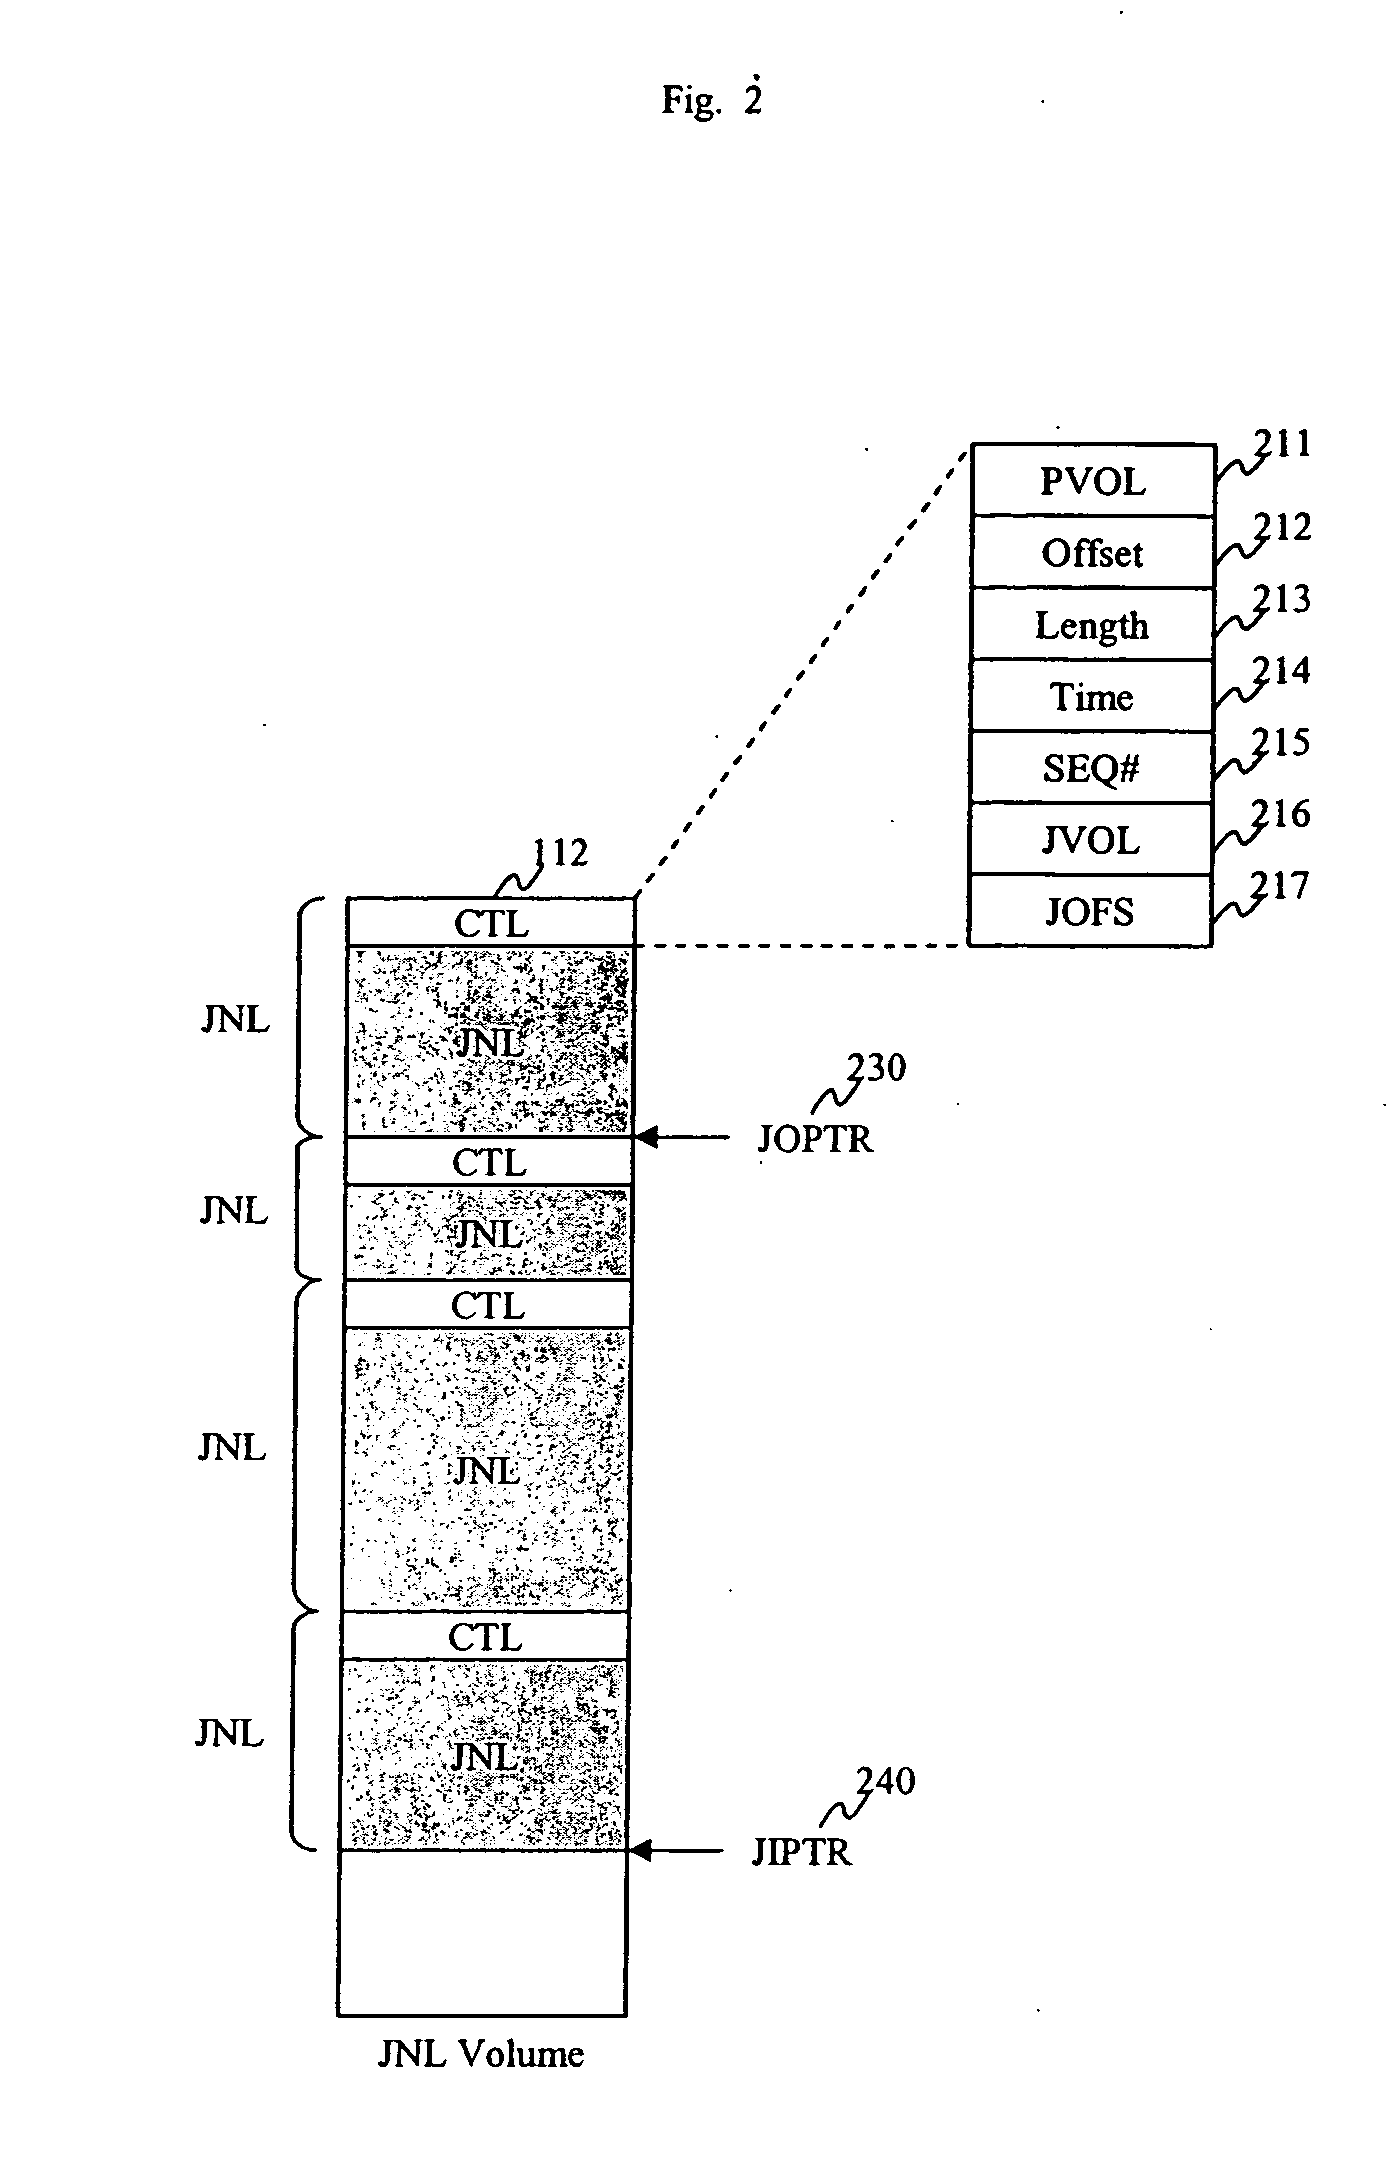 Remote copy system having multiple data centers